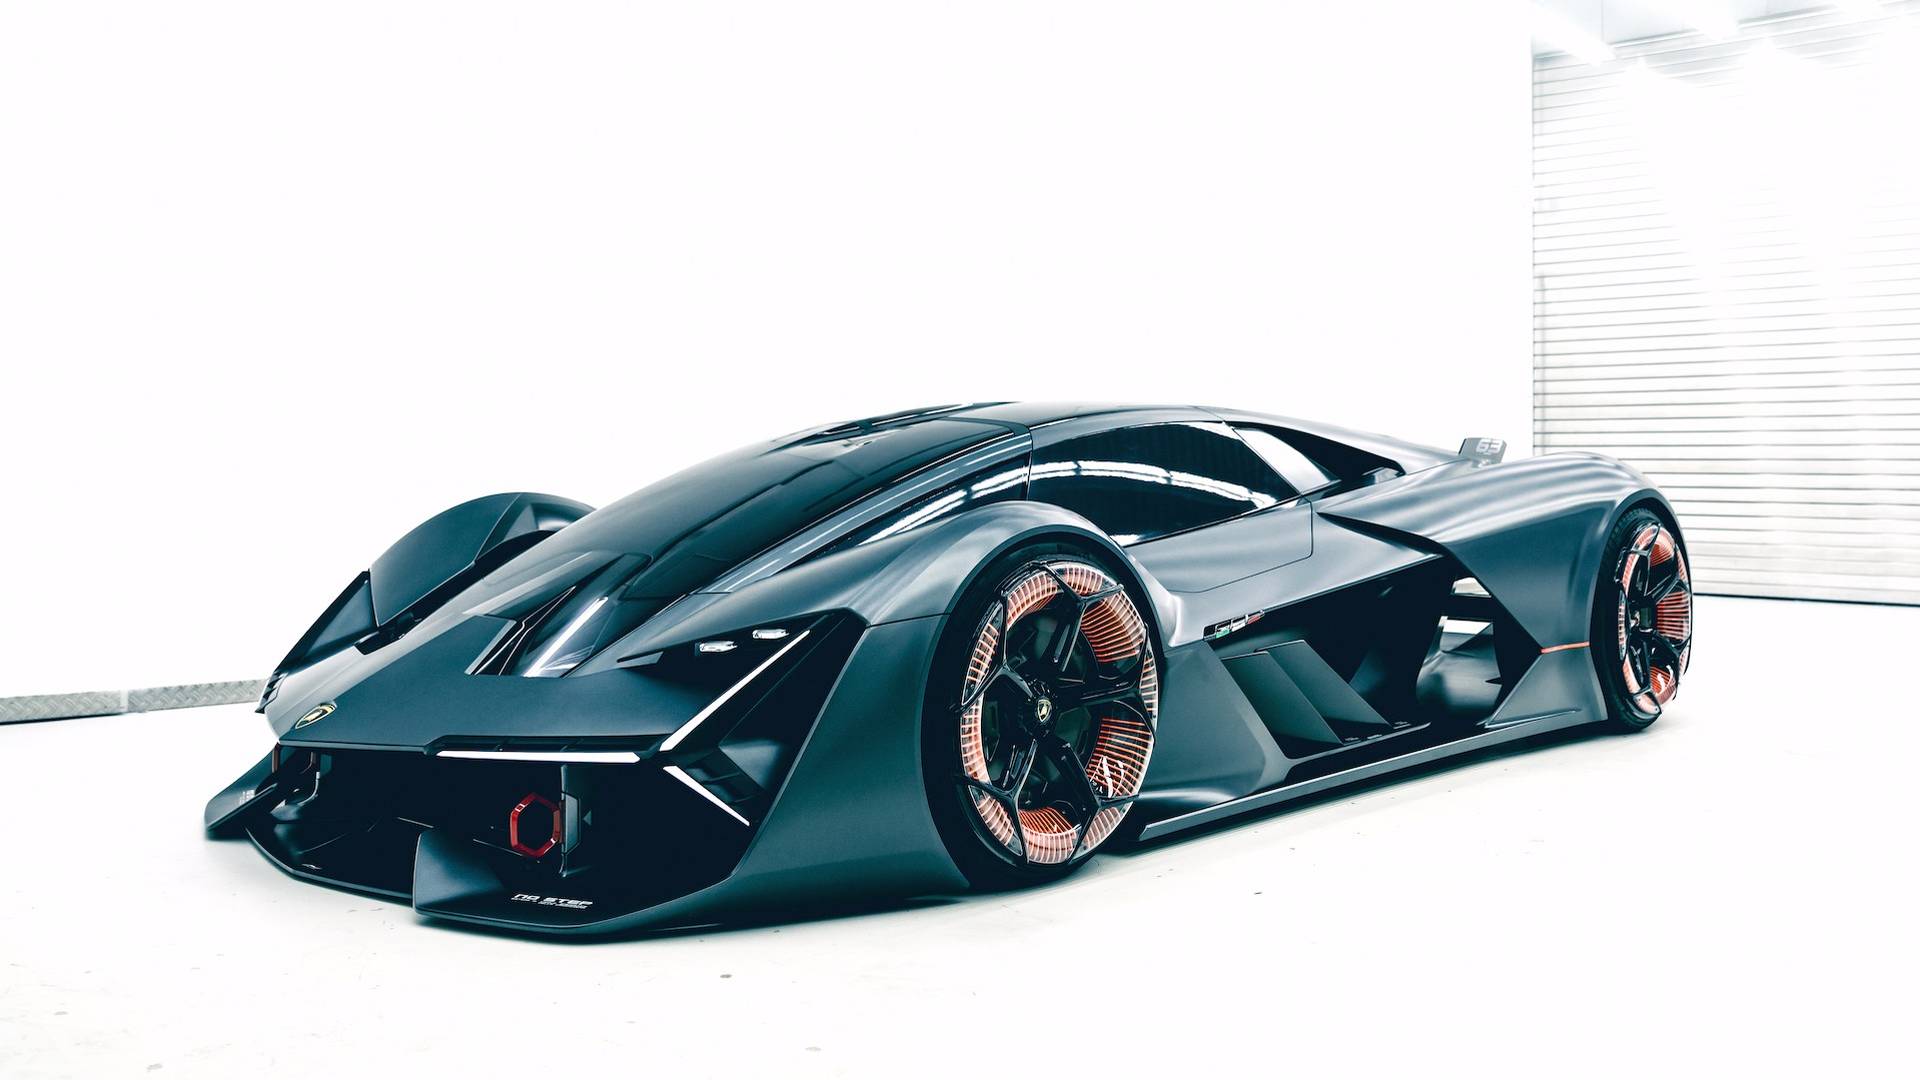 The Lamborghini mixed supercar will be unveiled at the 2019 Frankfurt Motor Show